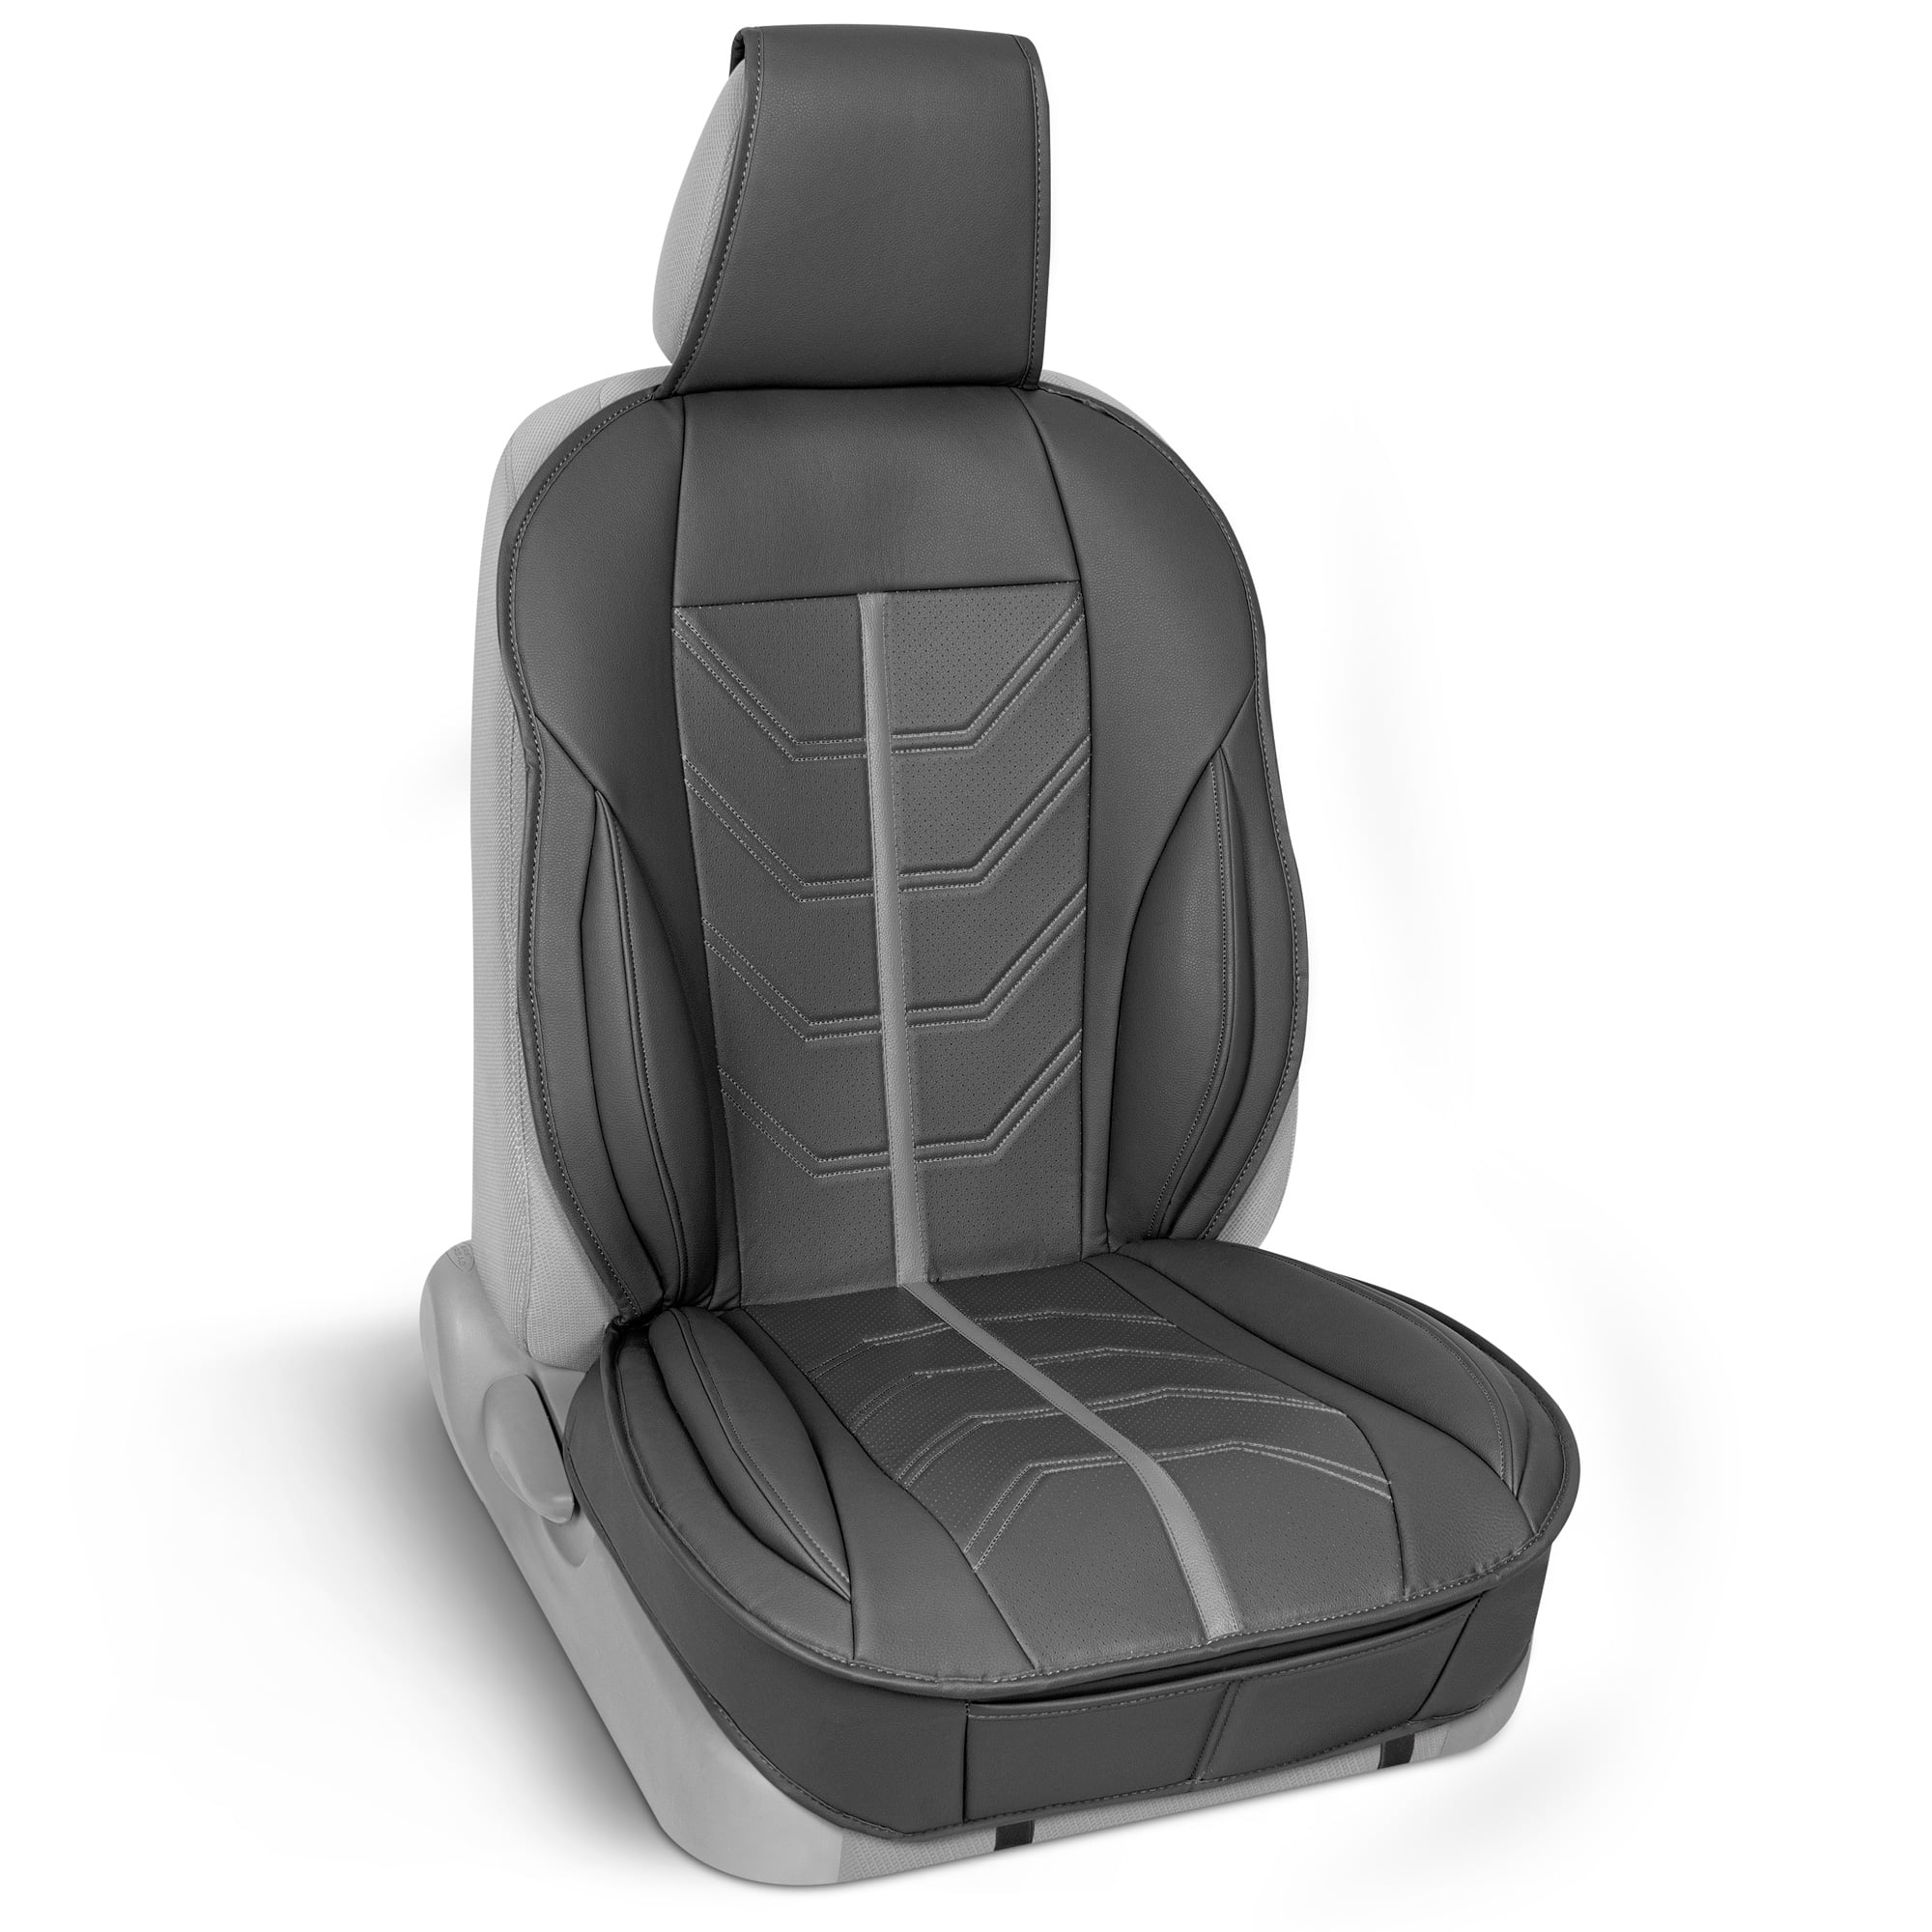 Motor Trend ComfortDrive Deluxe Faux Leather Front Seat Cover for Car Truck  Van  SUV, Piece Gray – Premium Ergonomic Padded Seat Cover Cushion for Front  Seats with Extended Coverage